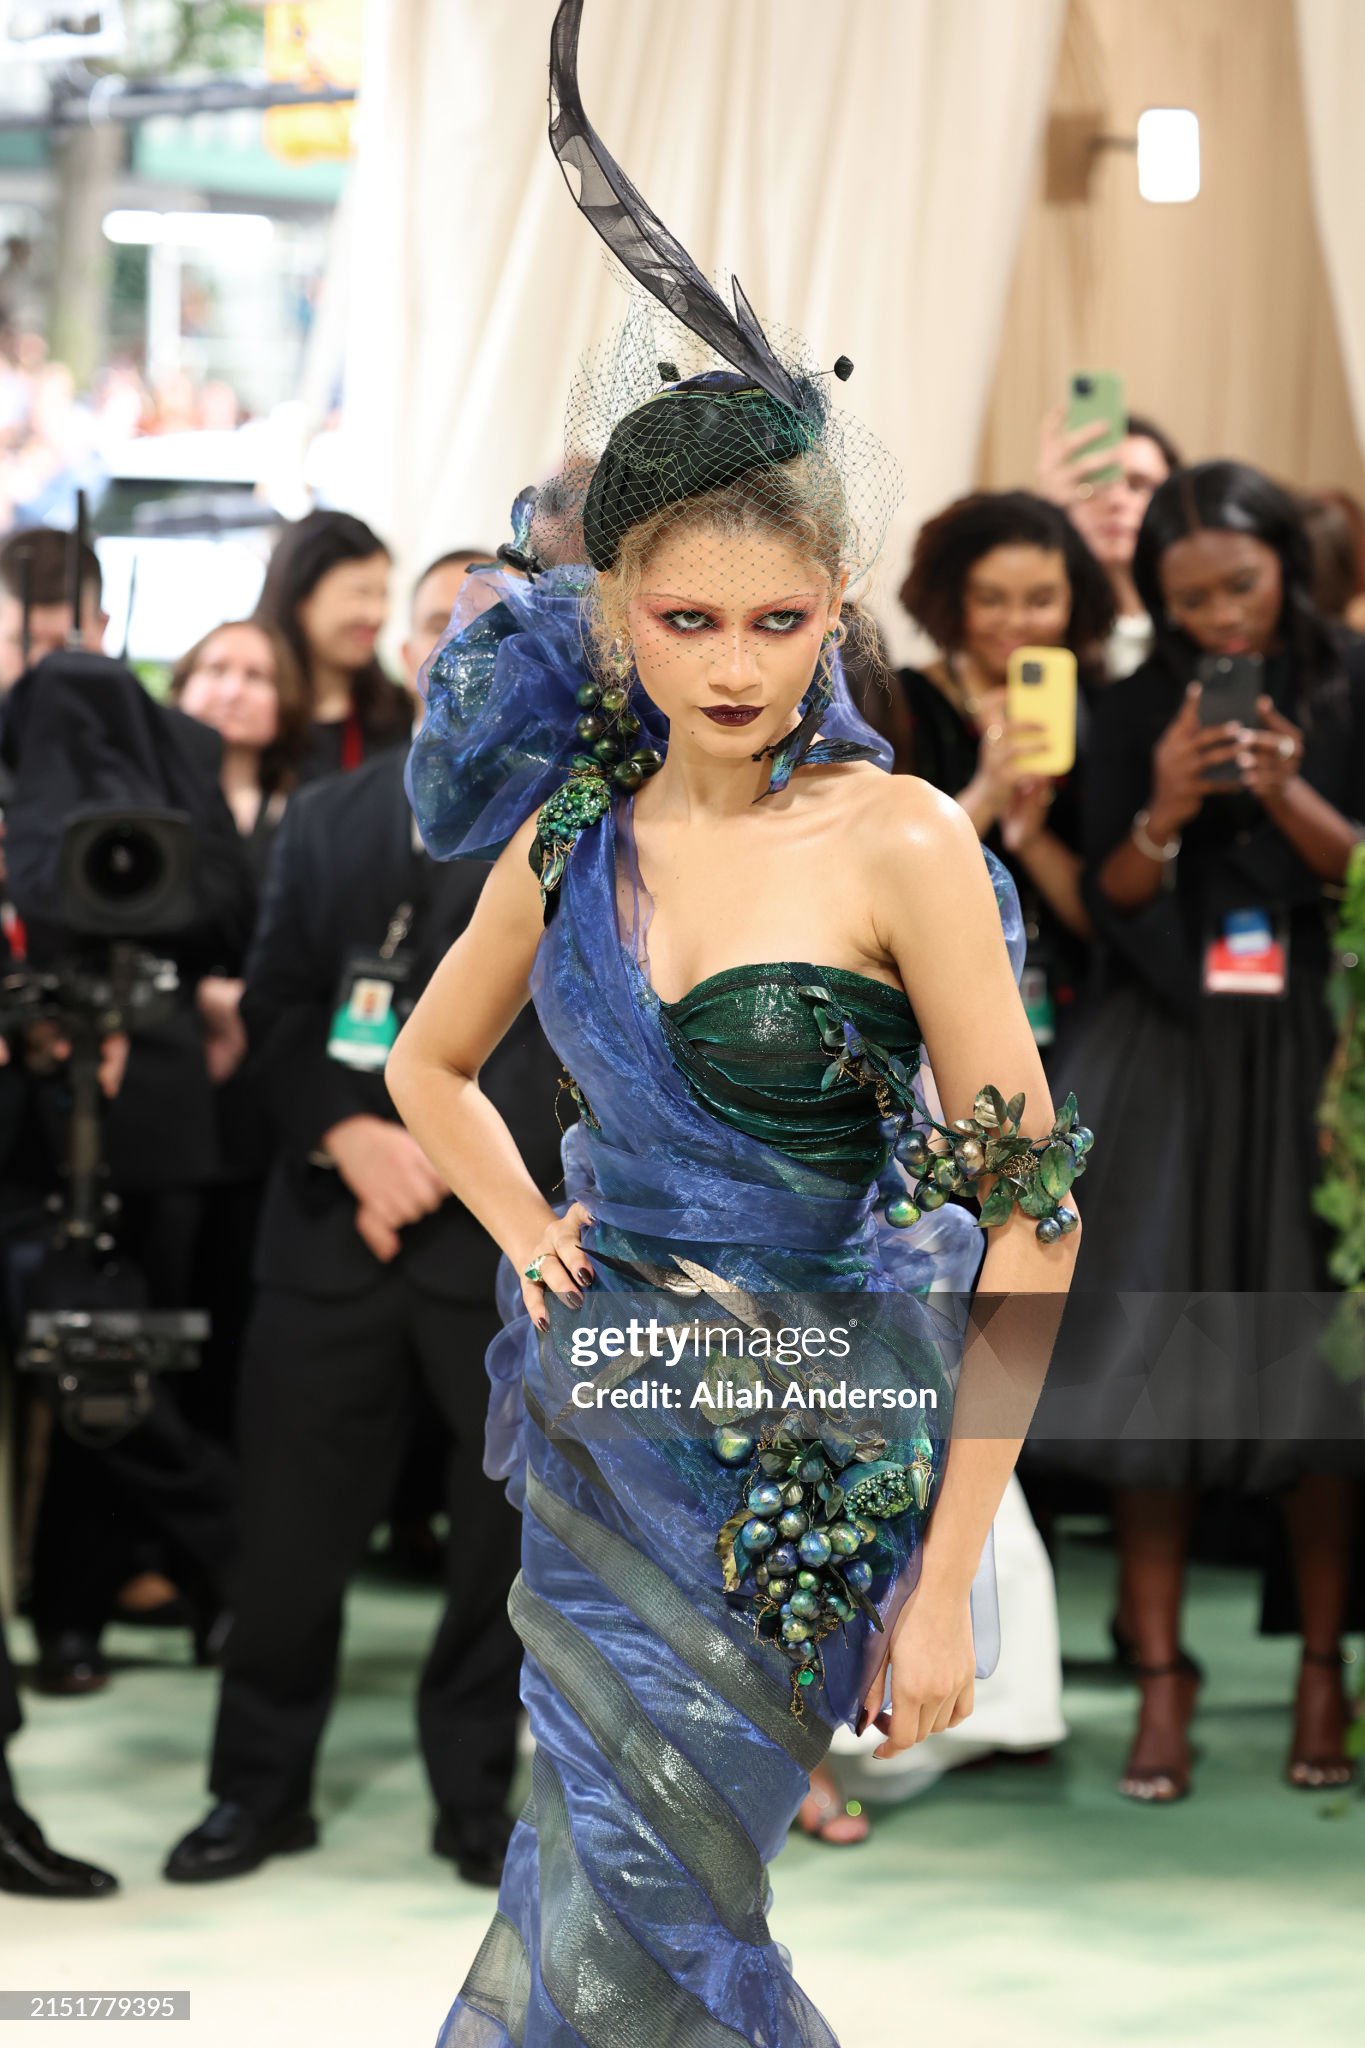 gettyimages-2151779395-2048x2048.jpg